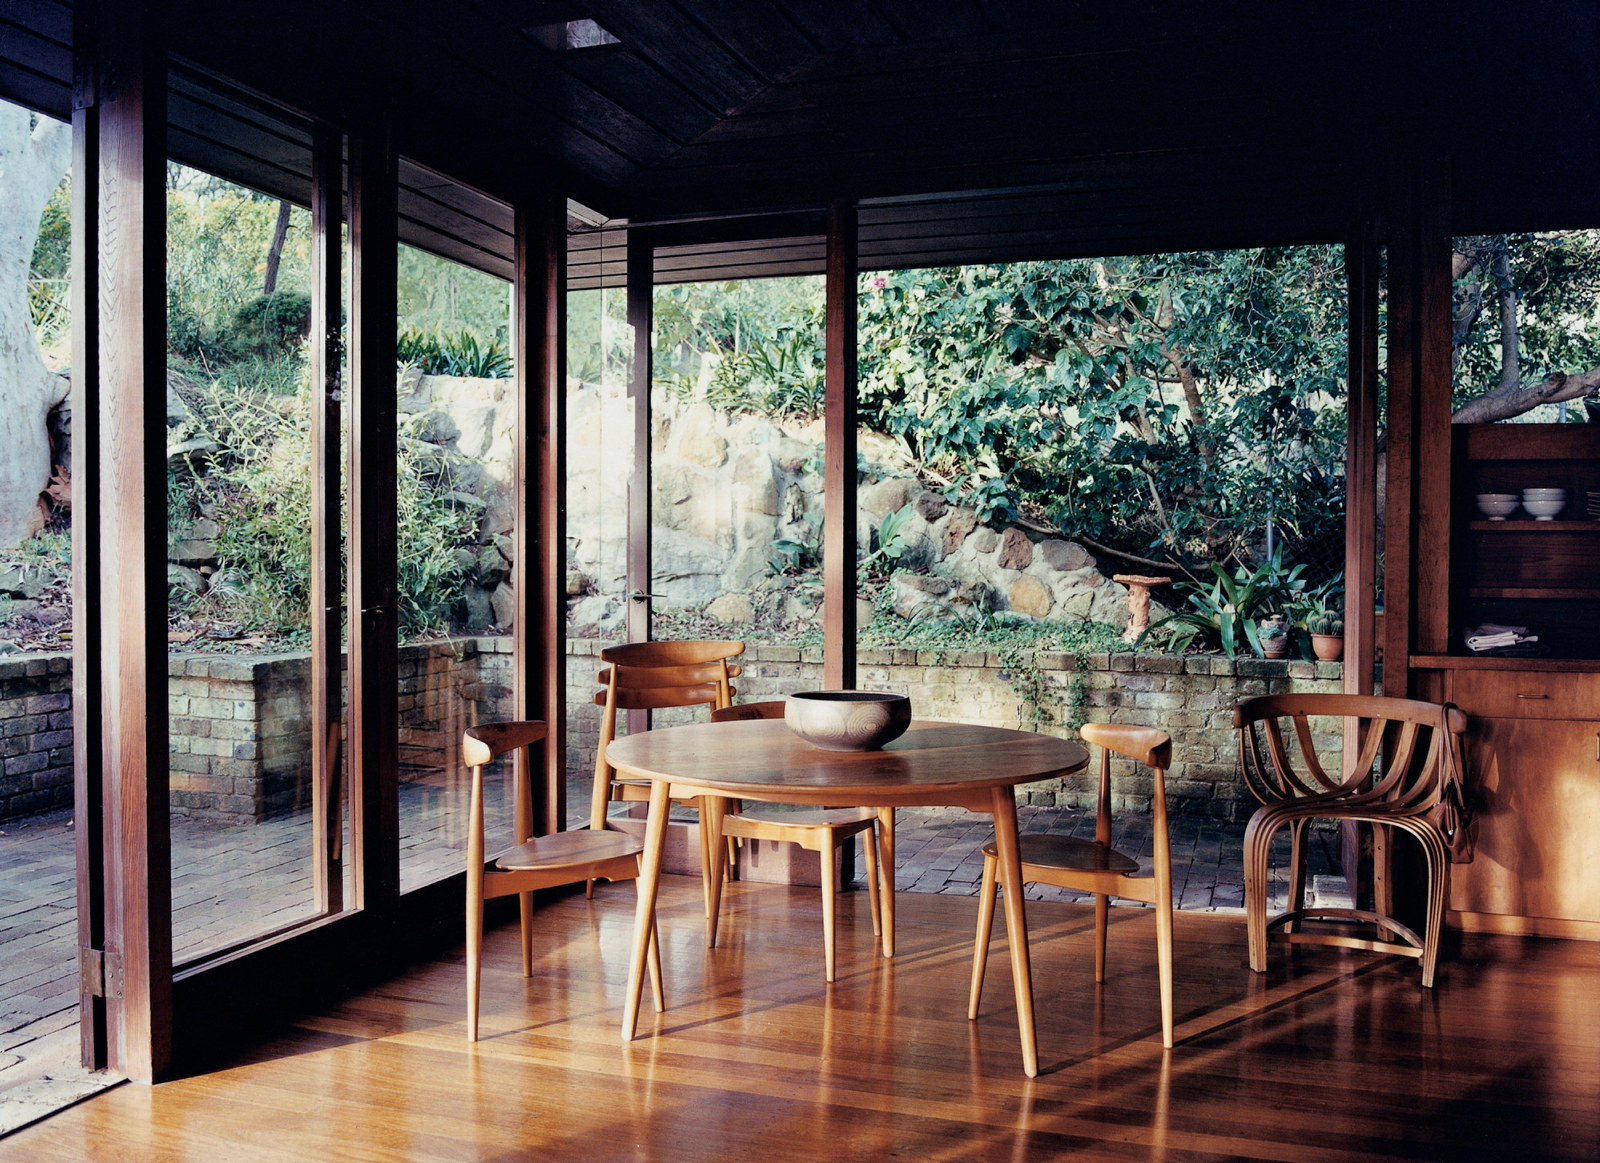 This is a photograph of a timber floored room open with large glass sheets on two walls and a timber dining table and chairs